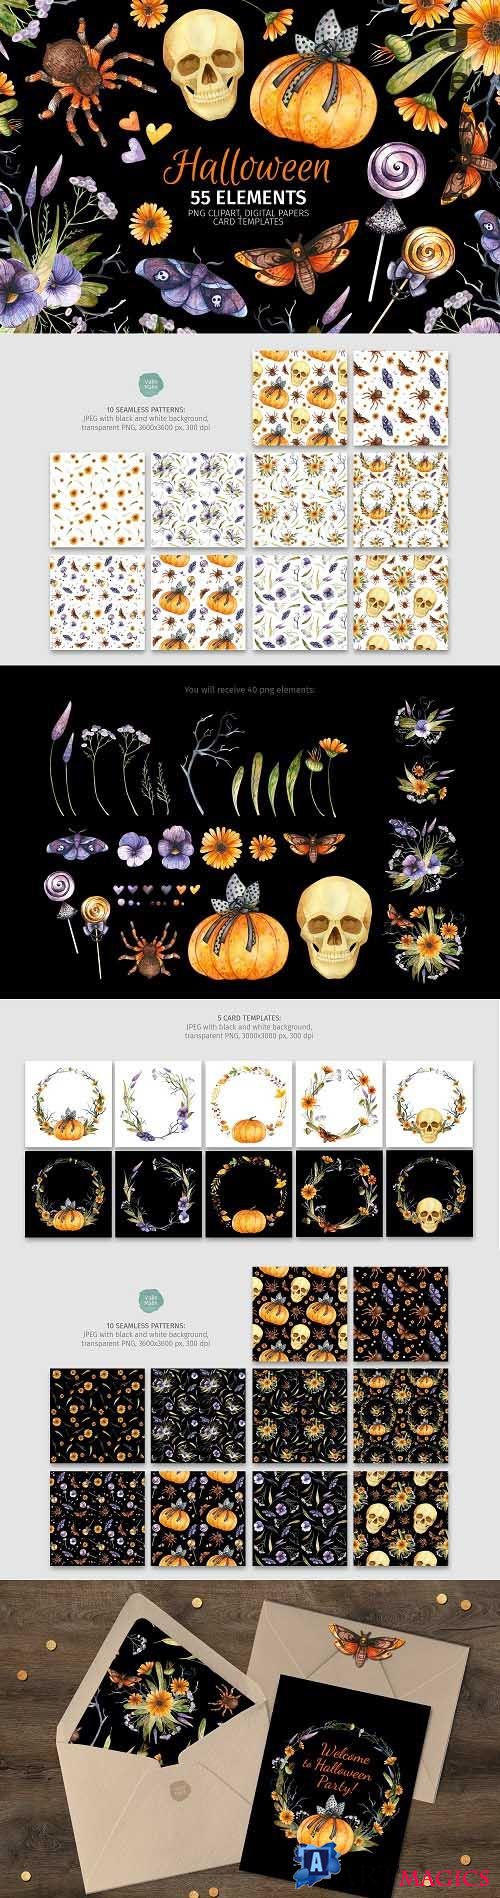 Halloween clipart, seamless patterns and card templates - 1481763